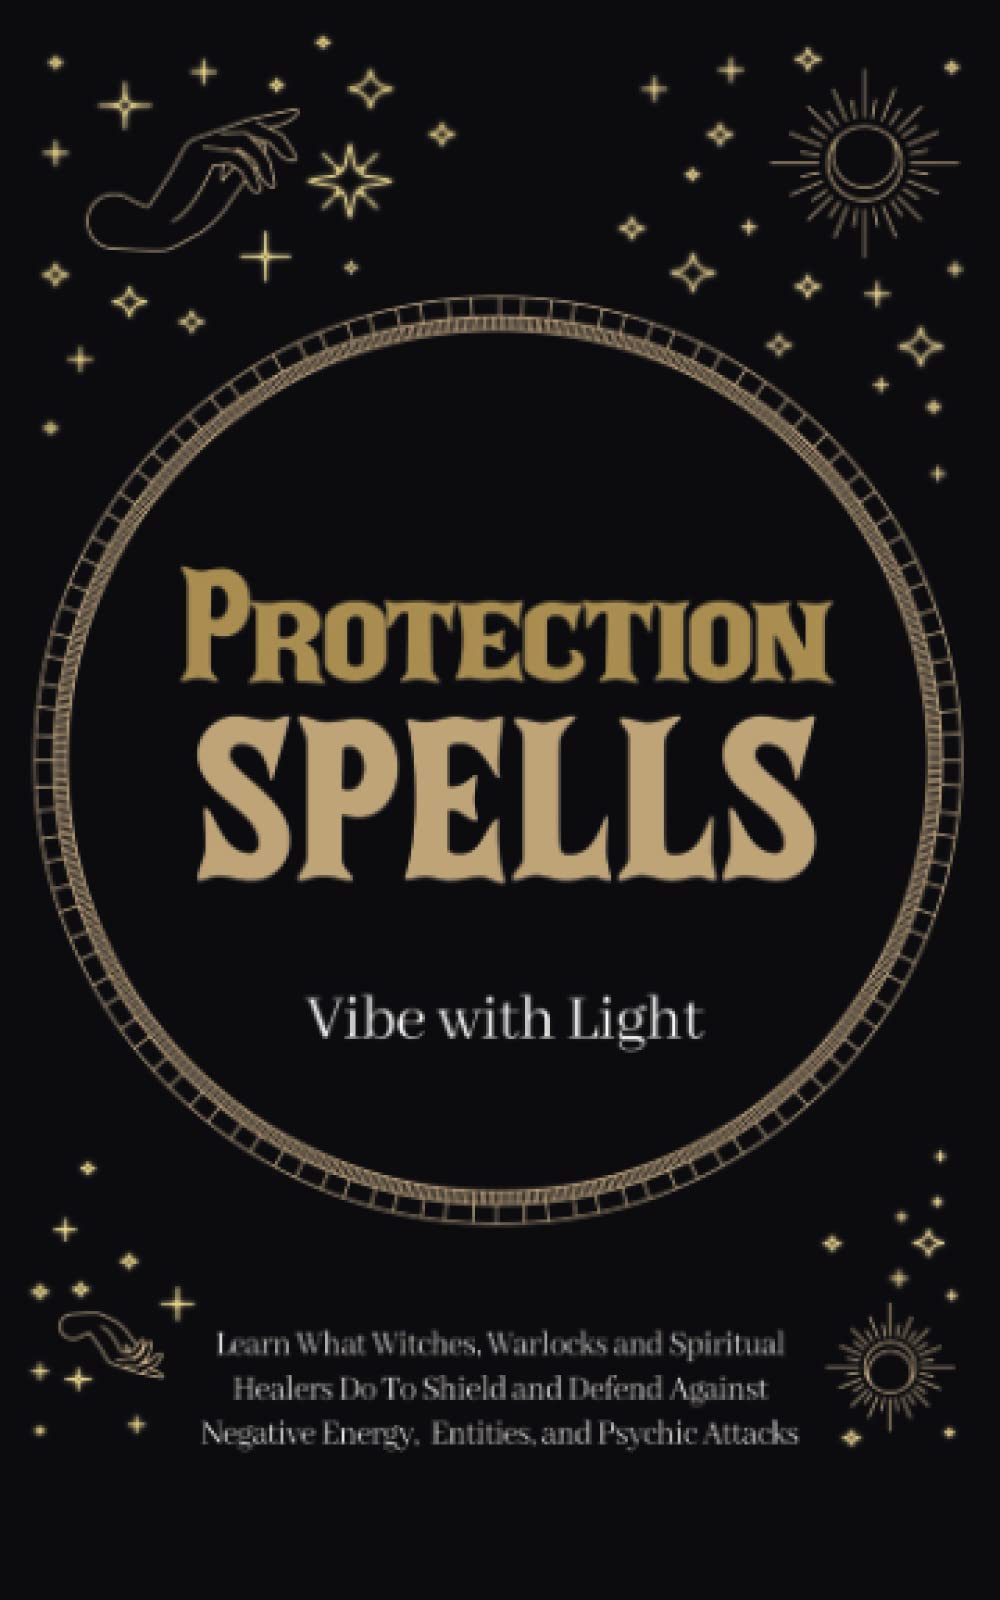 Protection Spells: Learn What Witches, Warlocks, and Spiritual Healers Do to Shield and Defend Against Negative Energies, Entities, and Psychic Attacks